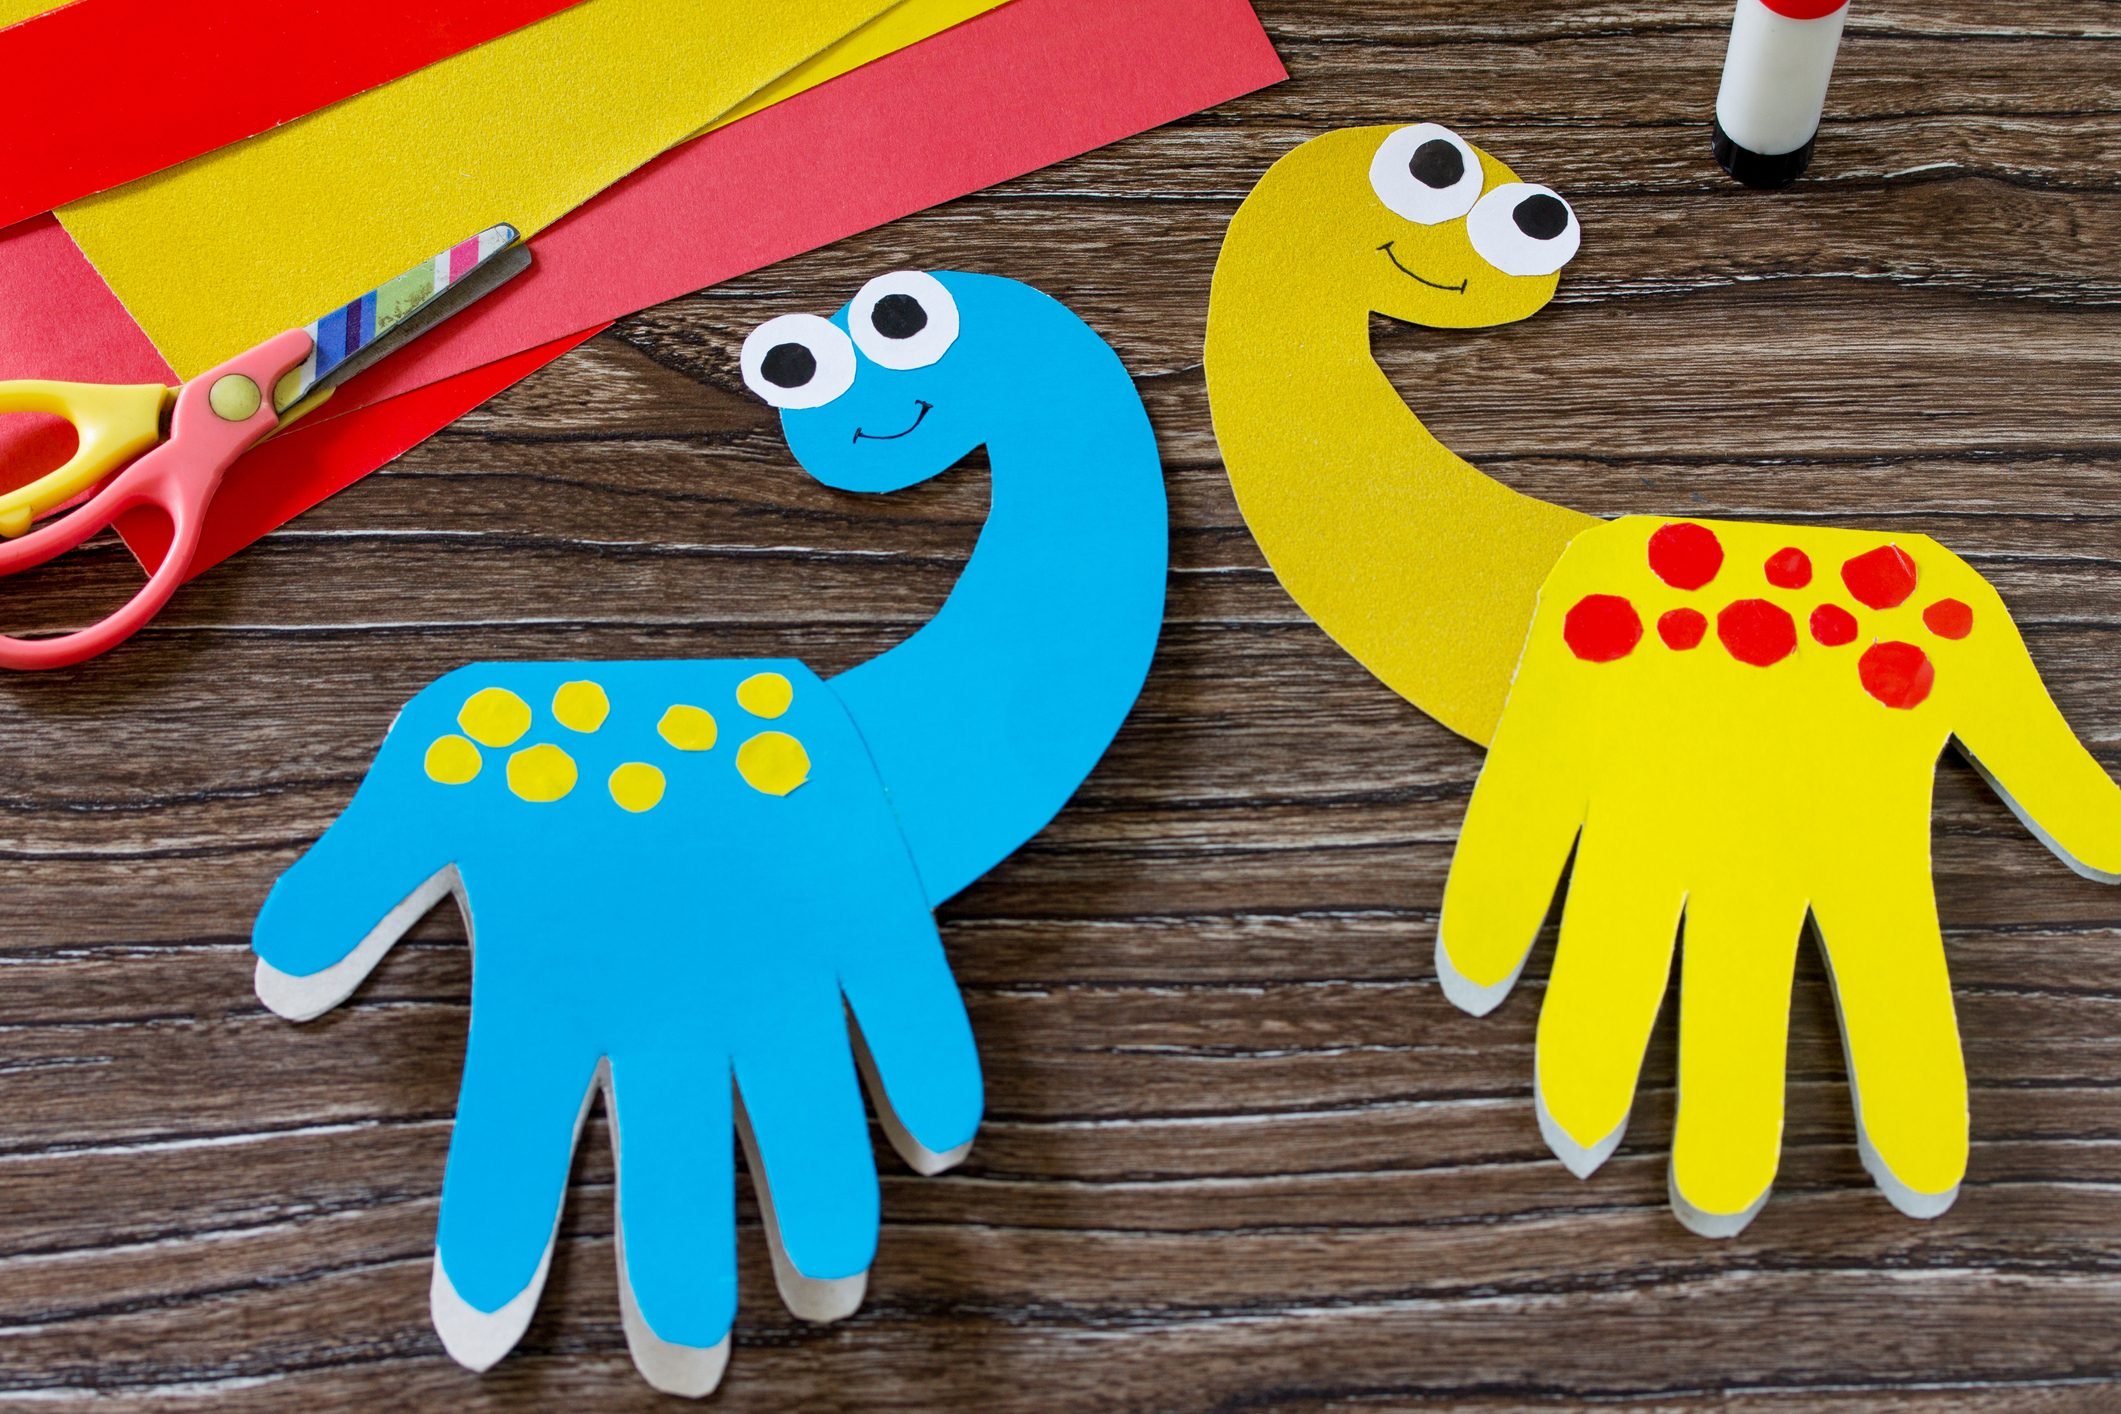 Fathers Day Craft For Preschoolers Discount Supplier, Save 49 jlcatj